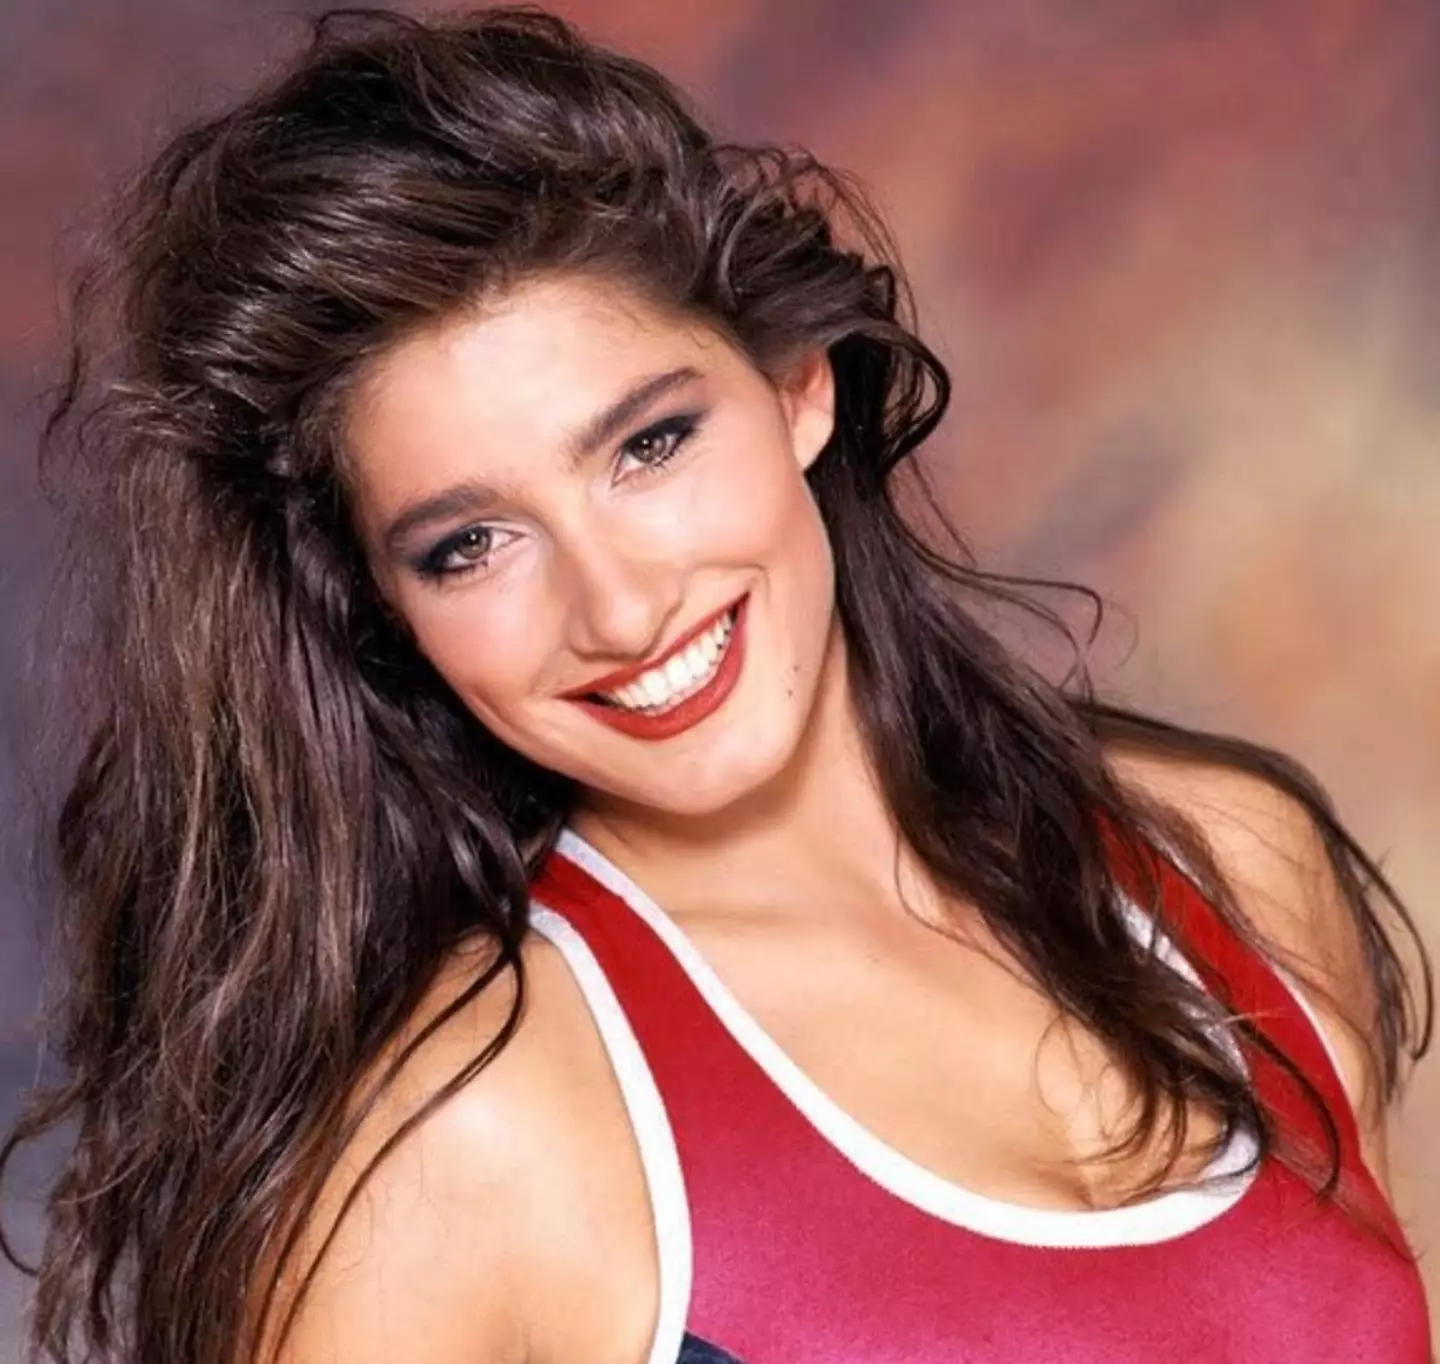 Diane Youdale starred as Jet in iconic ITV 90s series 'Gladiators'.